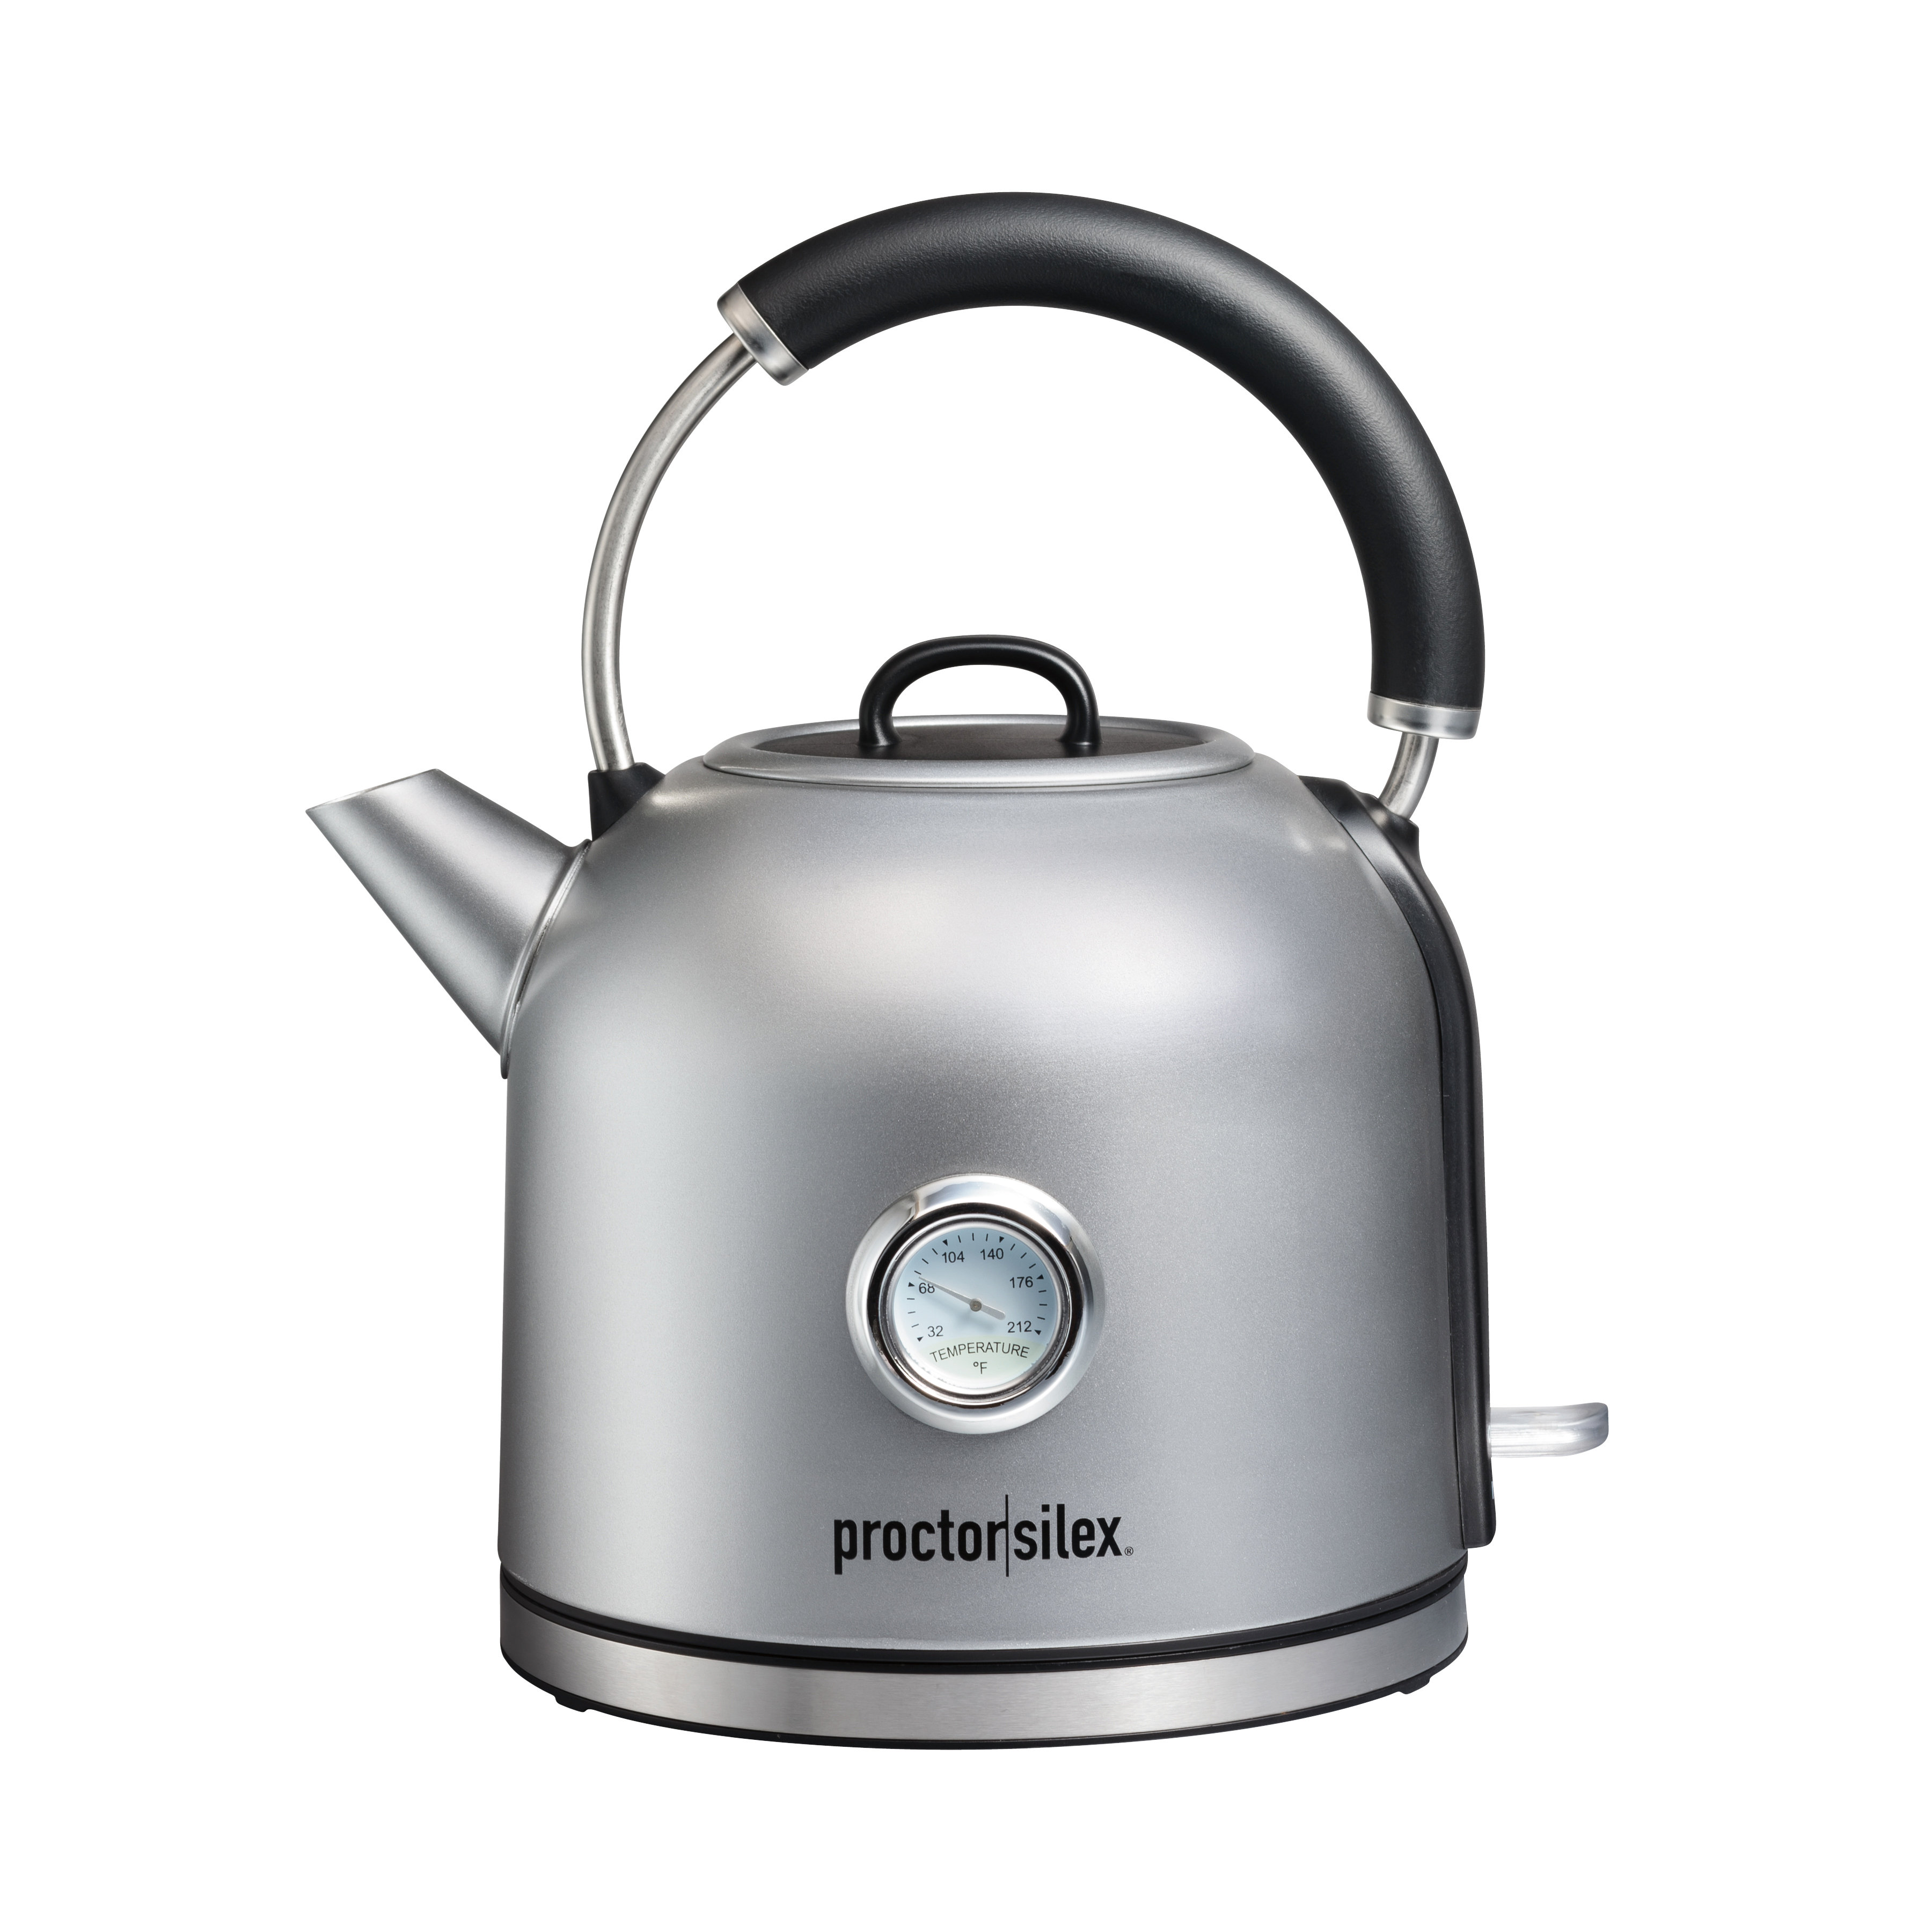 Ninja Kt200 Precision Temperature Electric Kettle, 1500 Watts, Stainless,  7-cup Capacity & Reviews